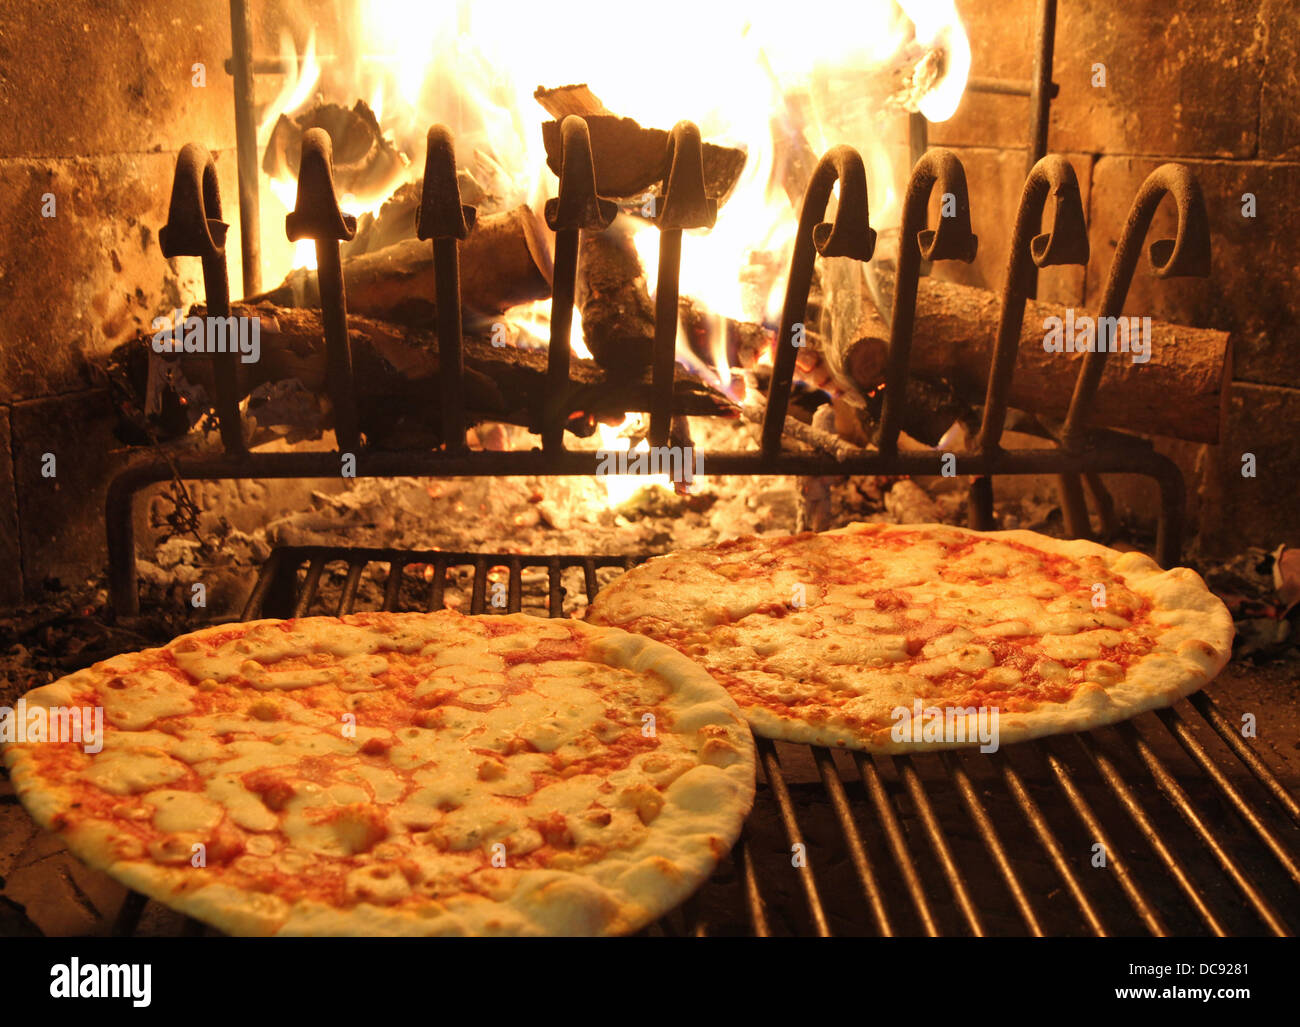 excellent fragrant pizza baked in a wood fireplace with a wood-burning oven pizzeria 1 Stock Photo